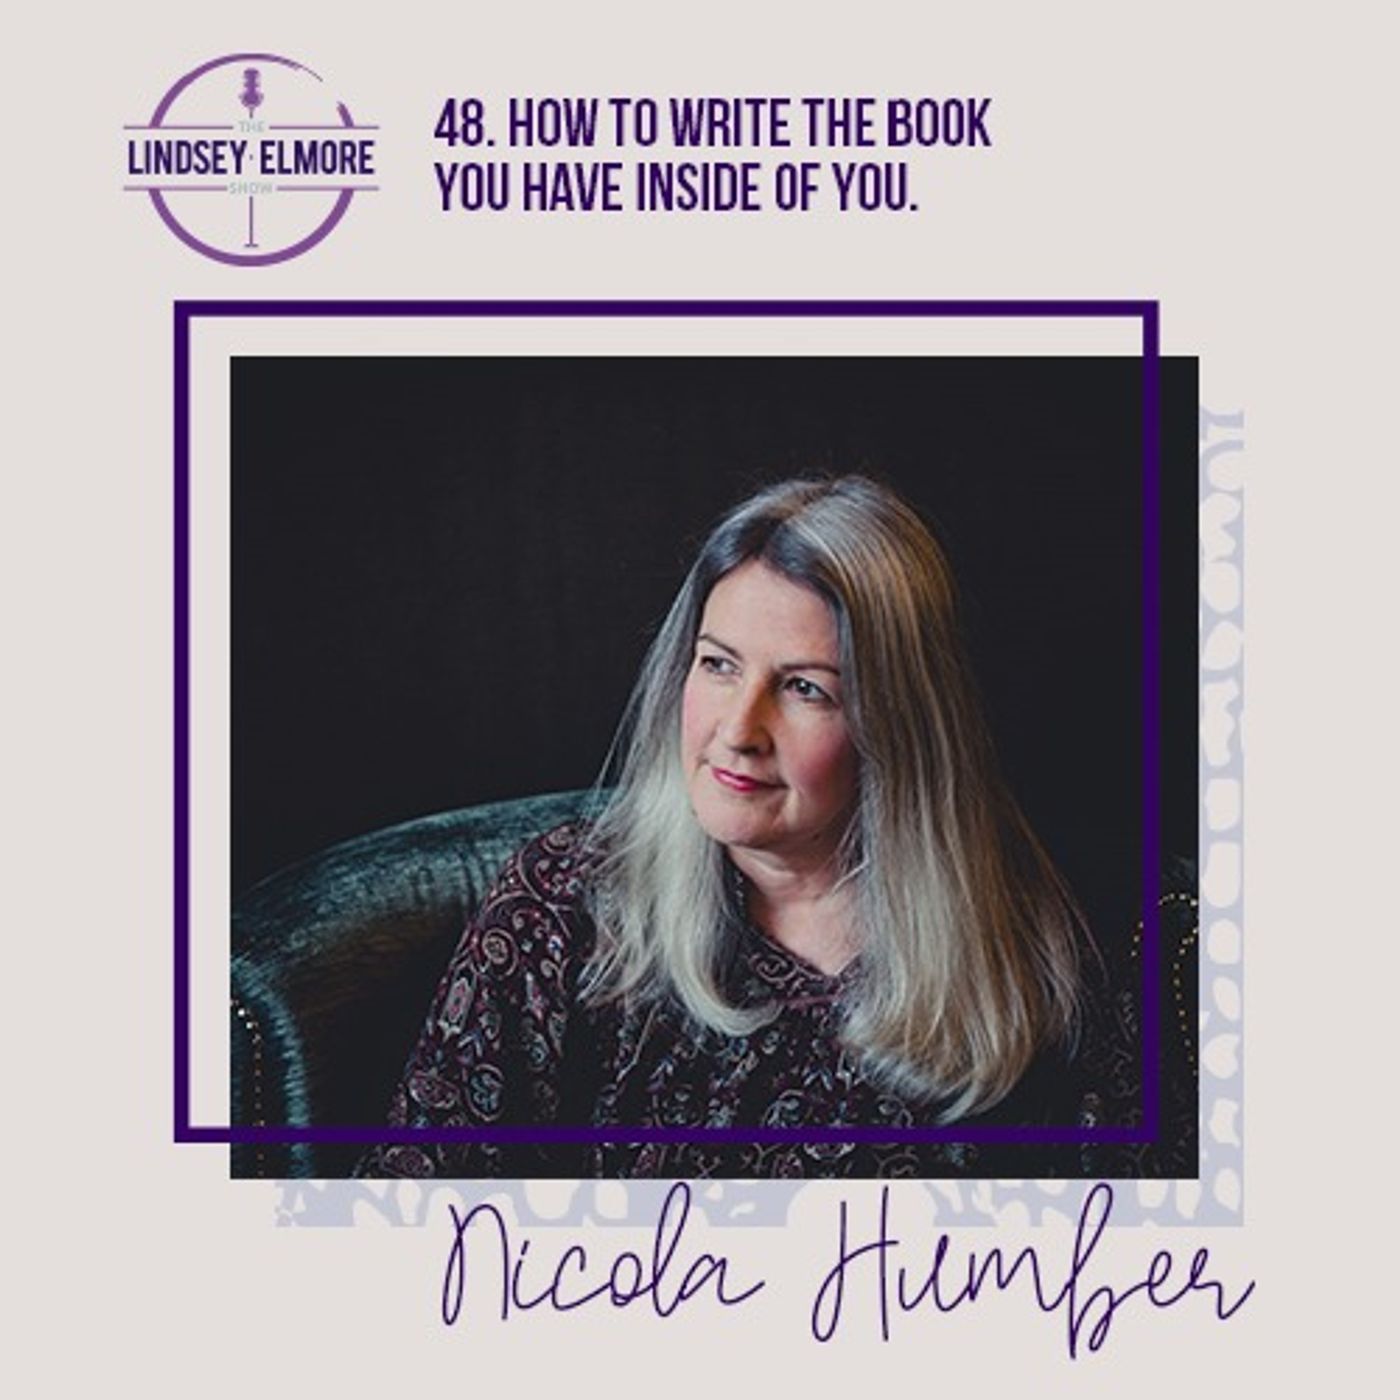 How to write the book you have inside of you. An interview with Nicola Humber.